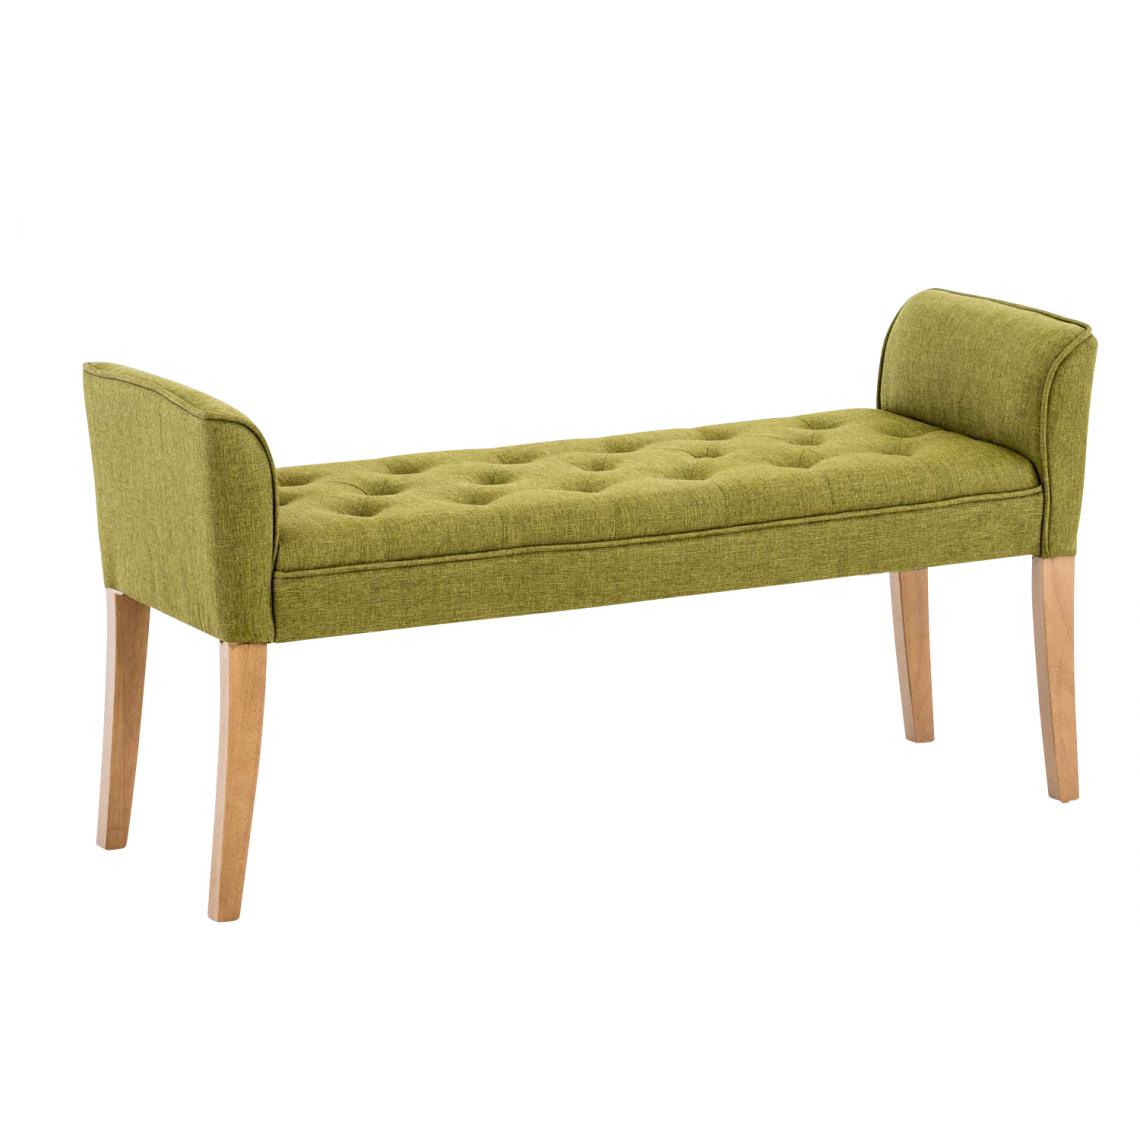 Icaverne - Inedit Chaise longue reference Lilongwe antique-light couleur vert - Chaises